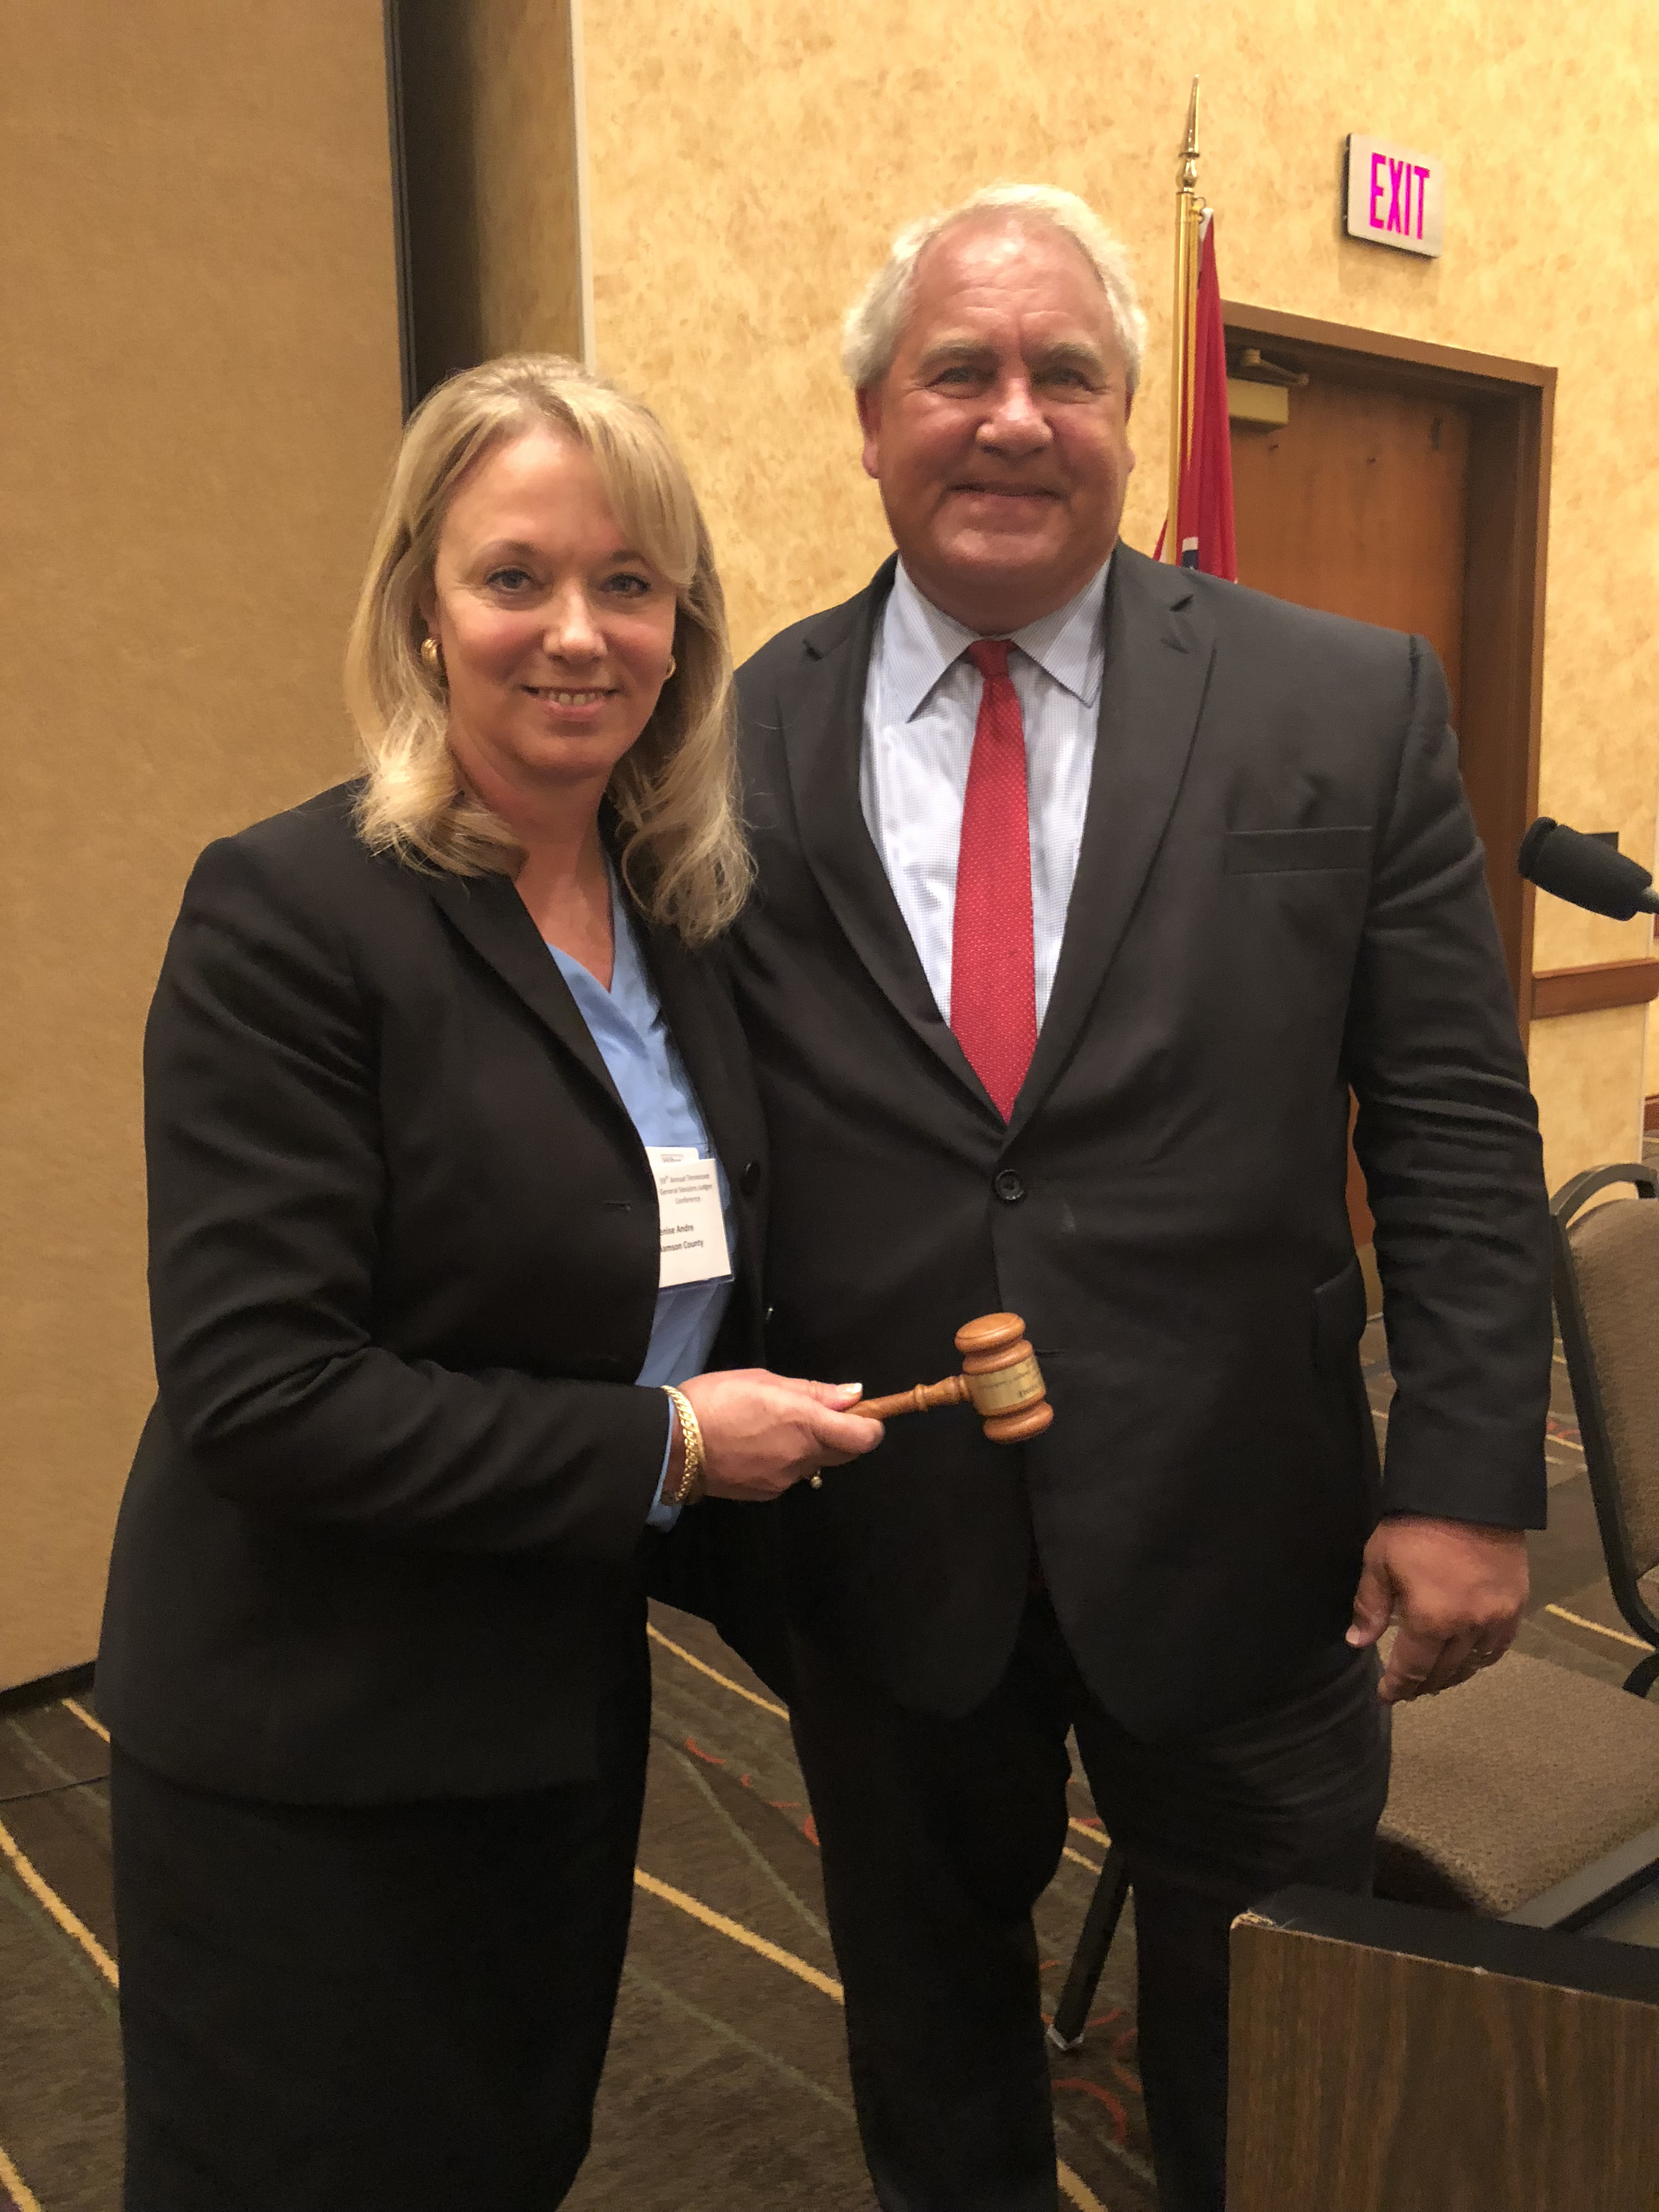 Judge Denise Andre, the outgoing president of the Tennessee General Sessions Judges Conference, with Judge Gary W. Starnes, the conference's new president